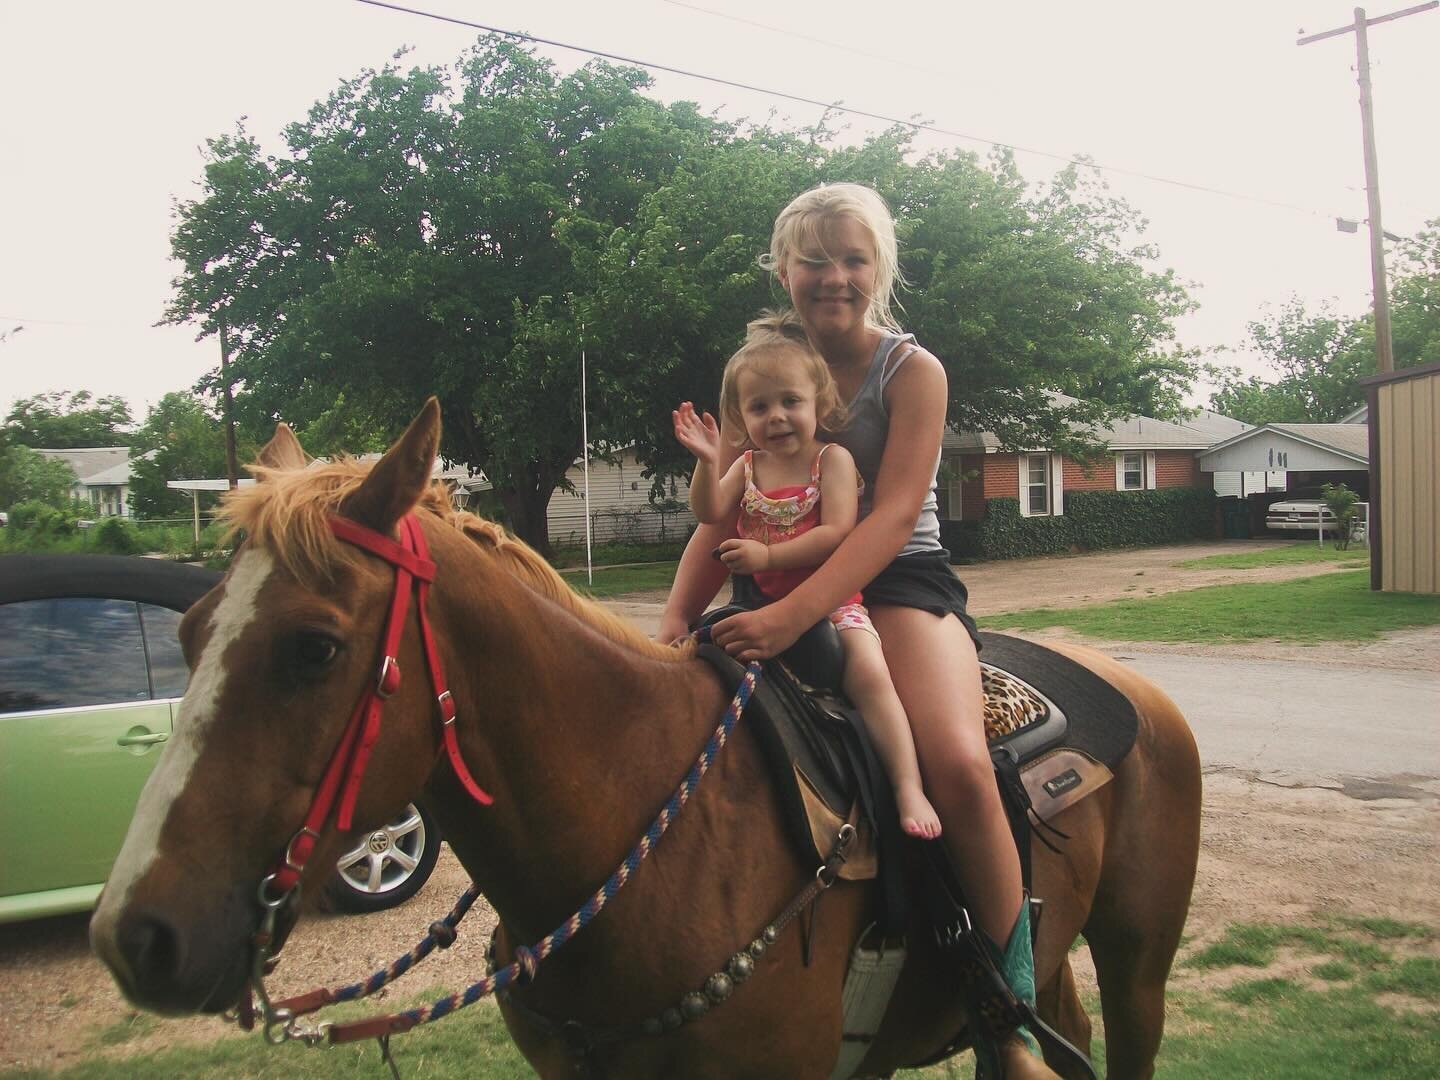 This was taken in my parents backyard over summer break in 2009. I miss that horse so much. He was the goodest boy. 🤠☀️